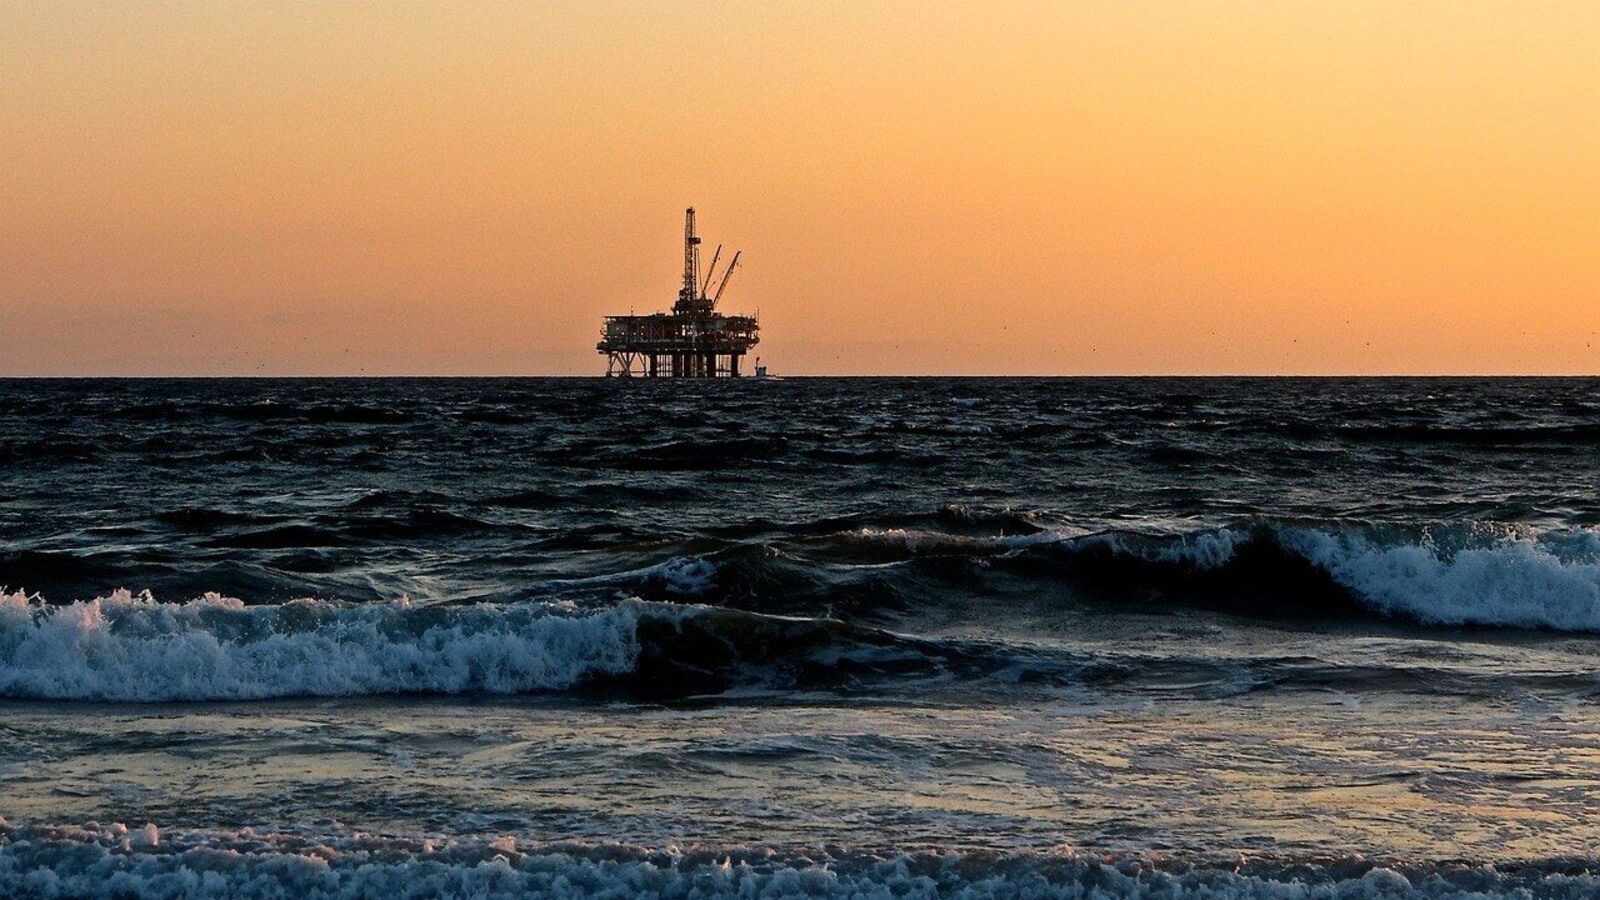 Oil prices drop on weaker US fuel demand, Gaza ceasefire report; Brent rebounds to $85/bbl